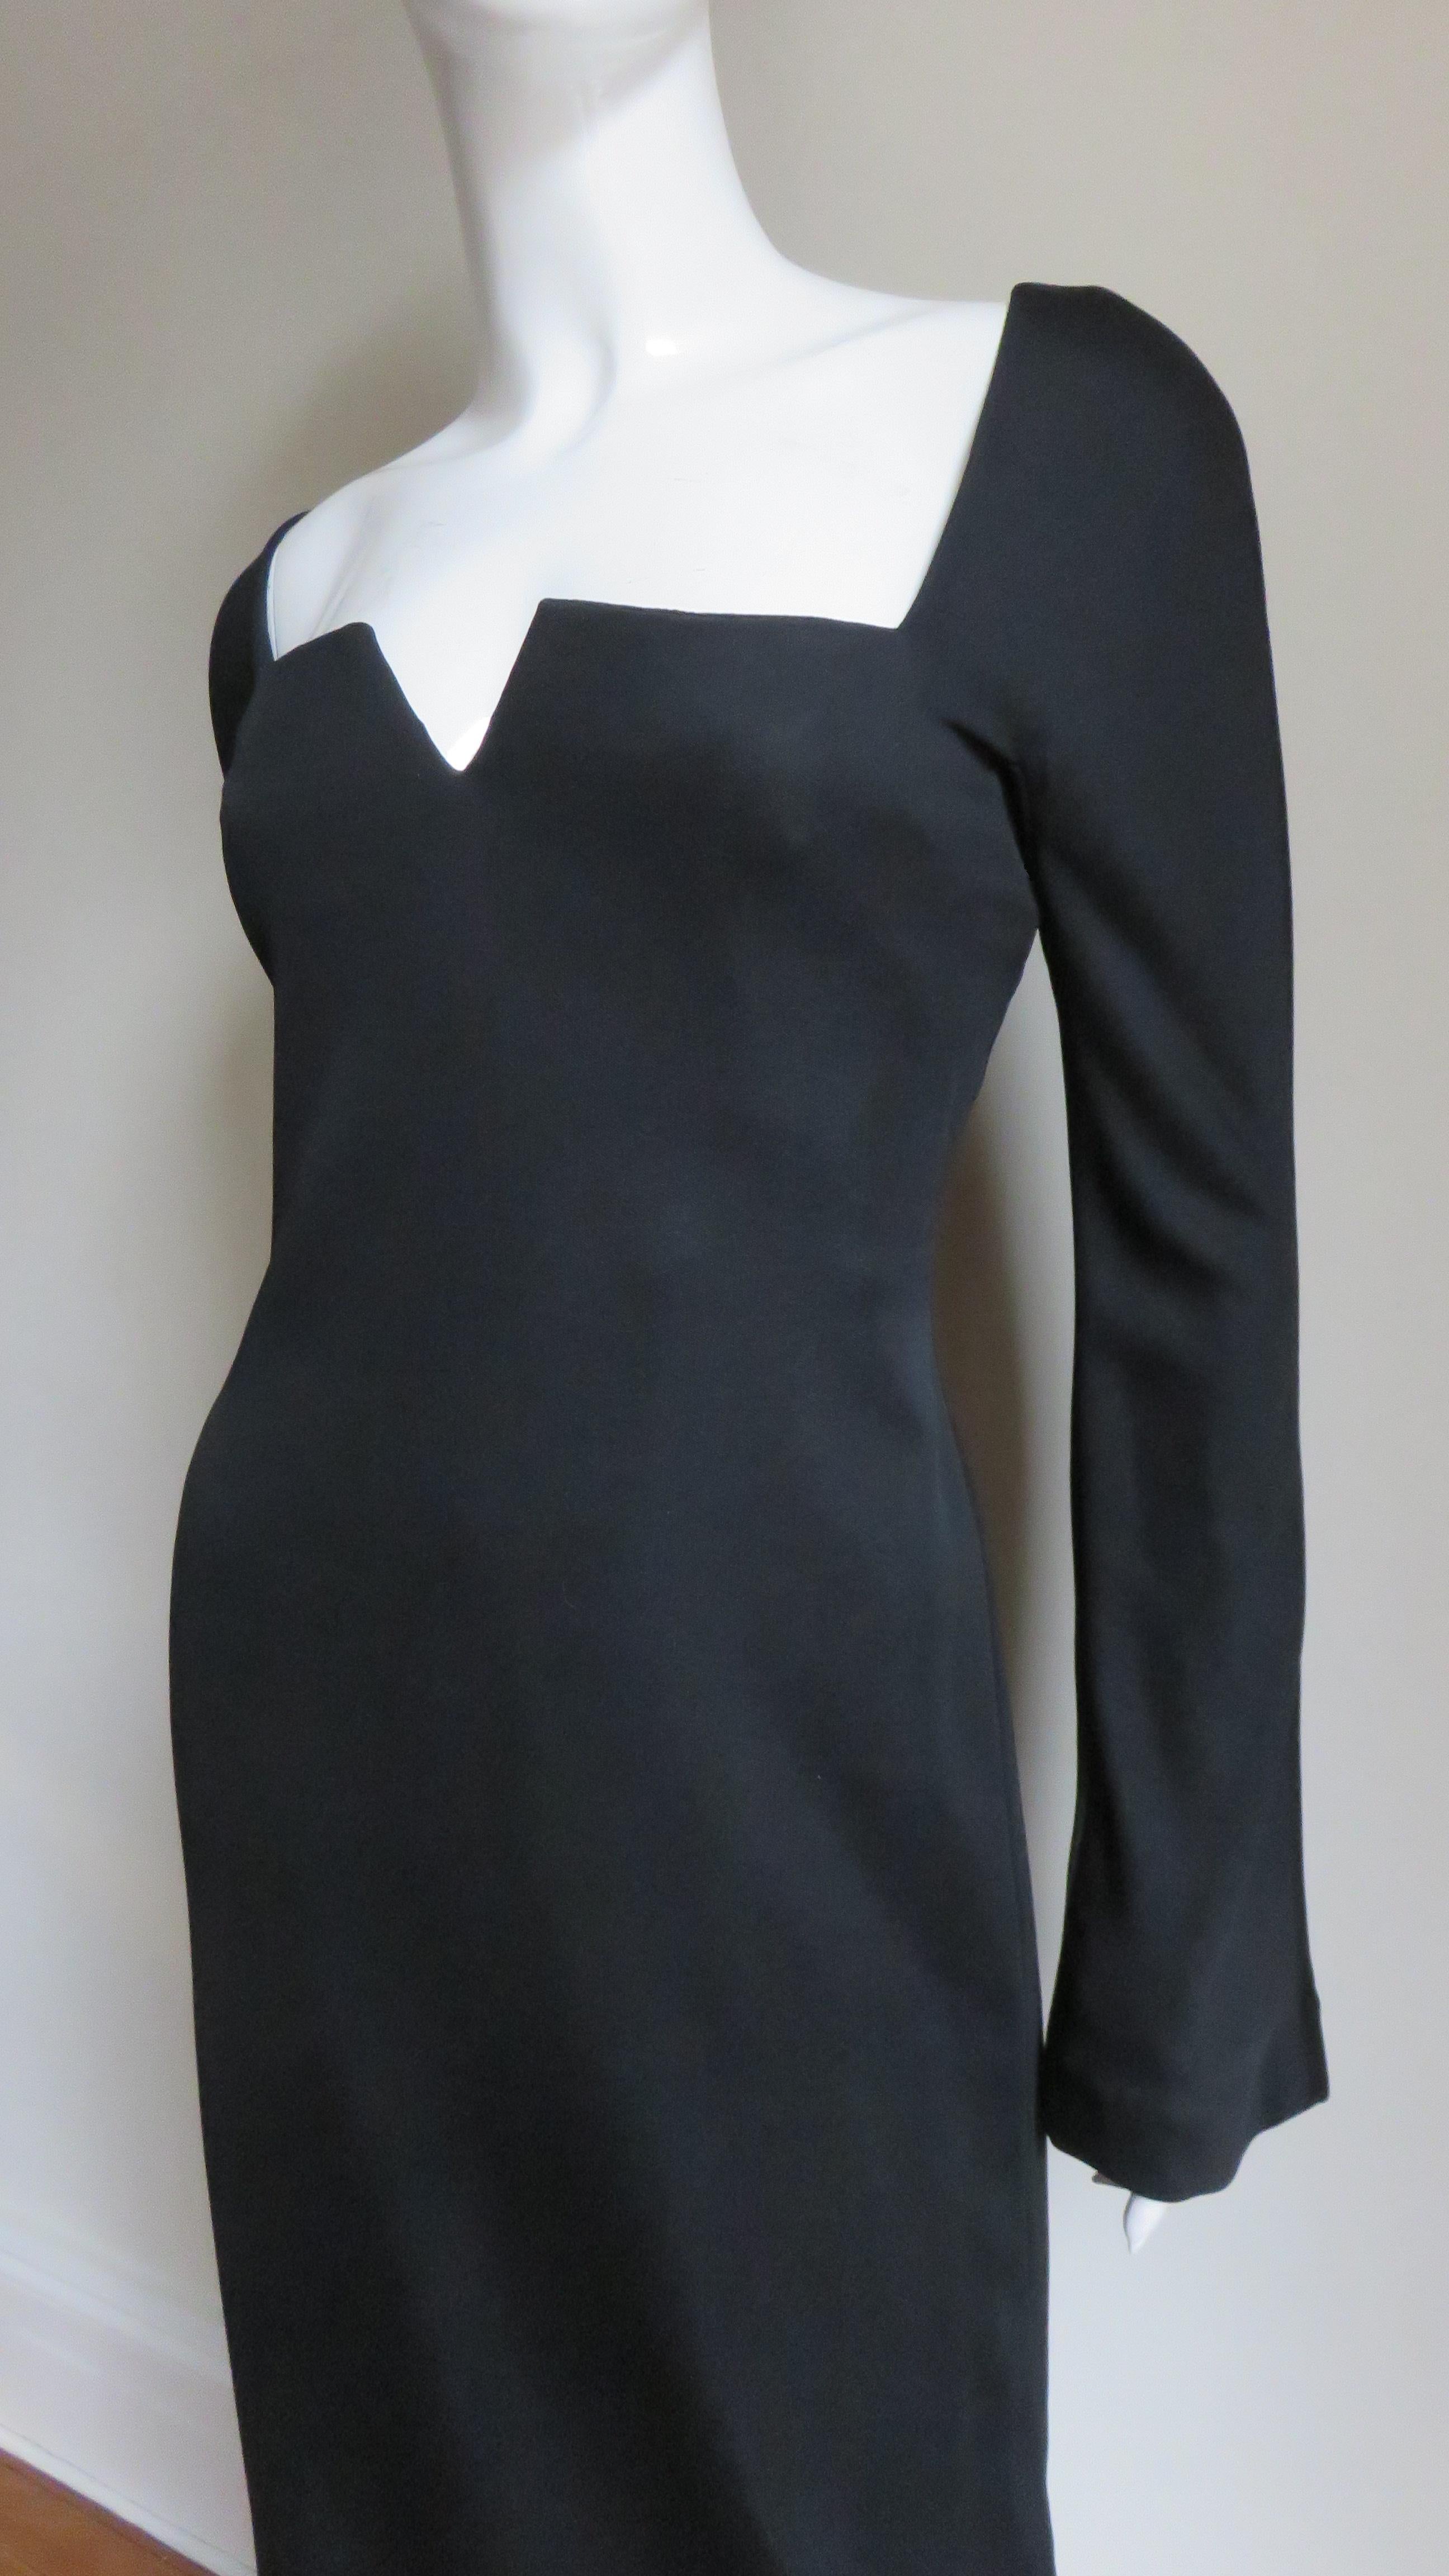 A fabulous black silk jersey dress from Gianni Versace. It has a square neckline with a notched center and long subtly belled sleeves. The dress is semi fitted with inner boning for support, a back zipper and it is unlined.
Fits sizes Small, Medium.